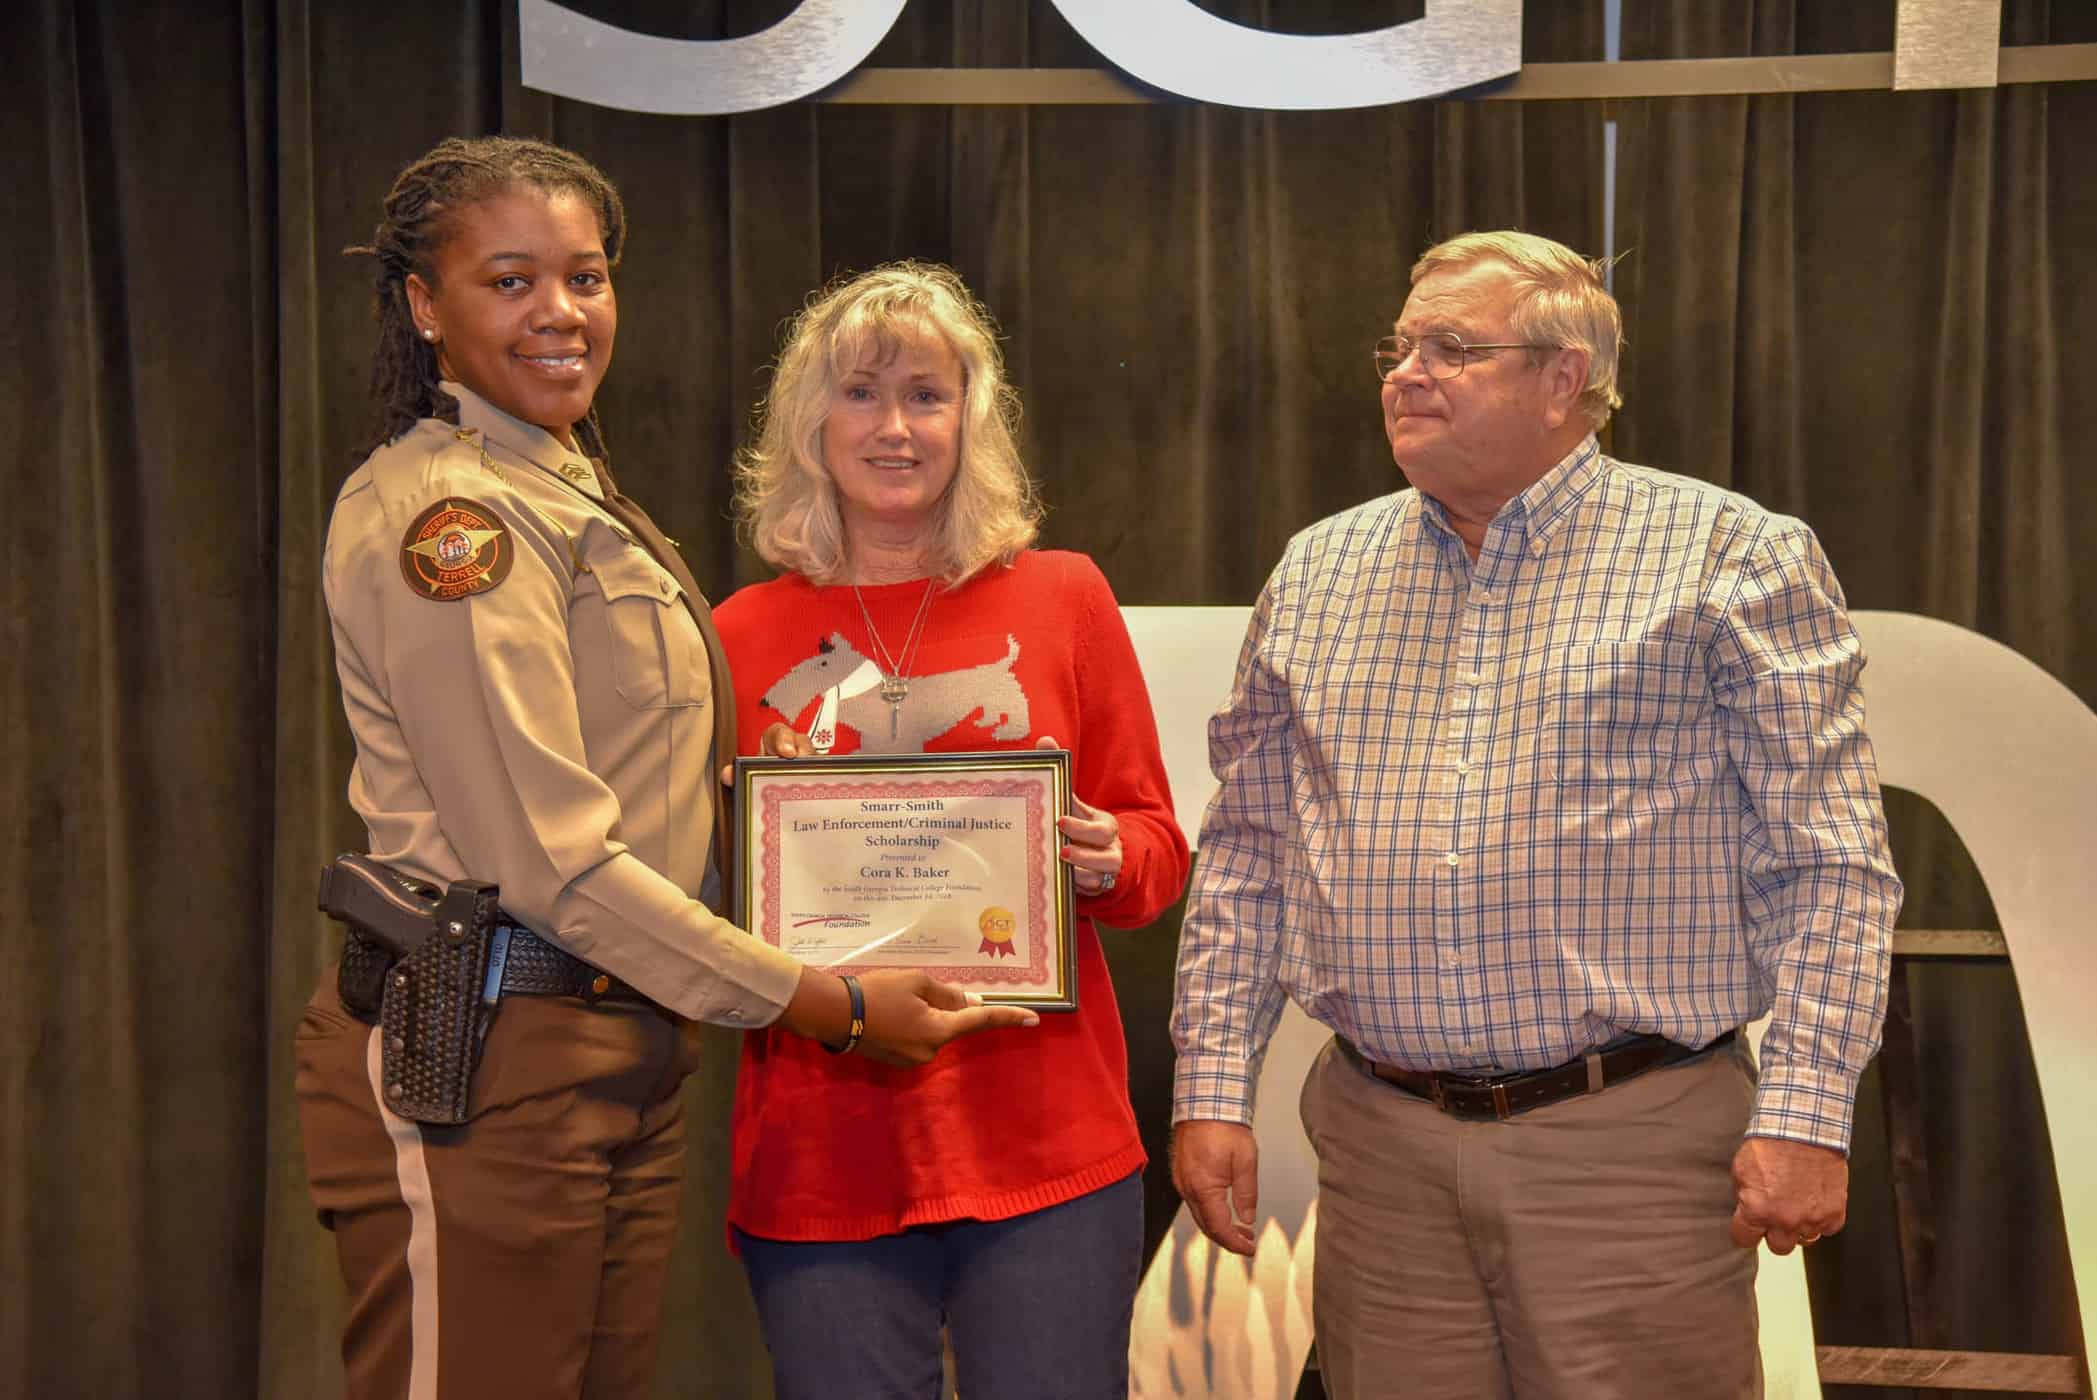 Paul and Sharon Smith Johnson (right to left) are shown above recognizing Cora Baker of the Terrell County Sheriff’s Office with a Smarr-Smith Criminal Justice Scholarship.